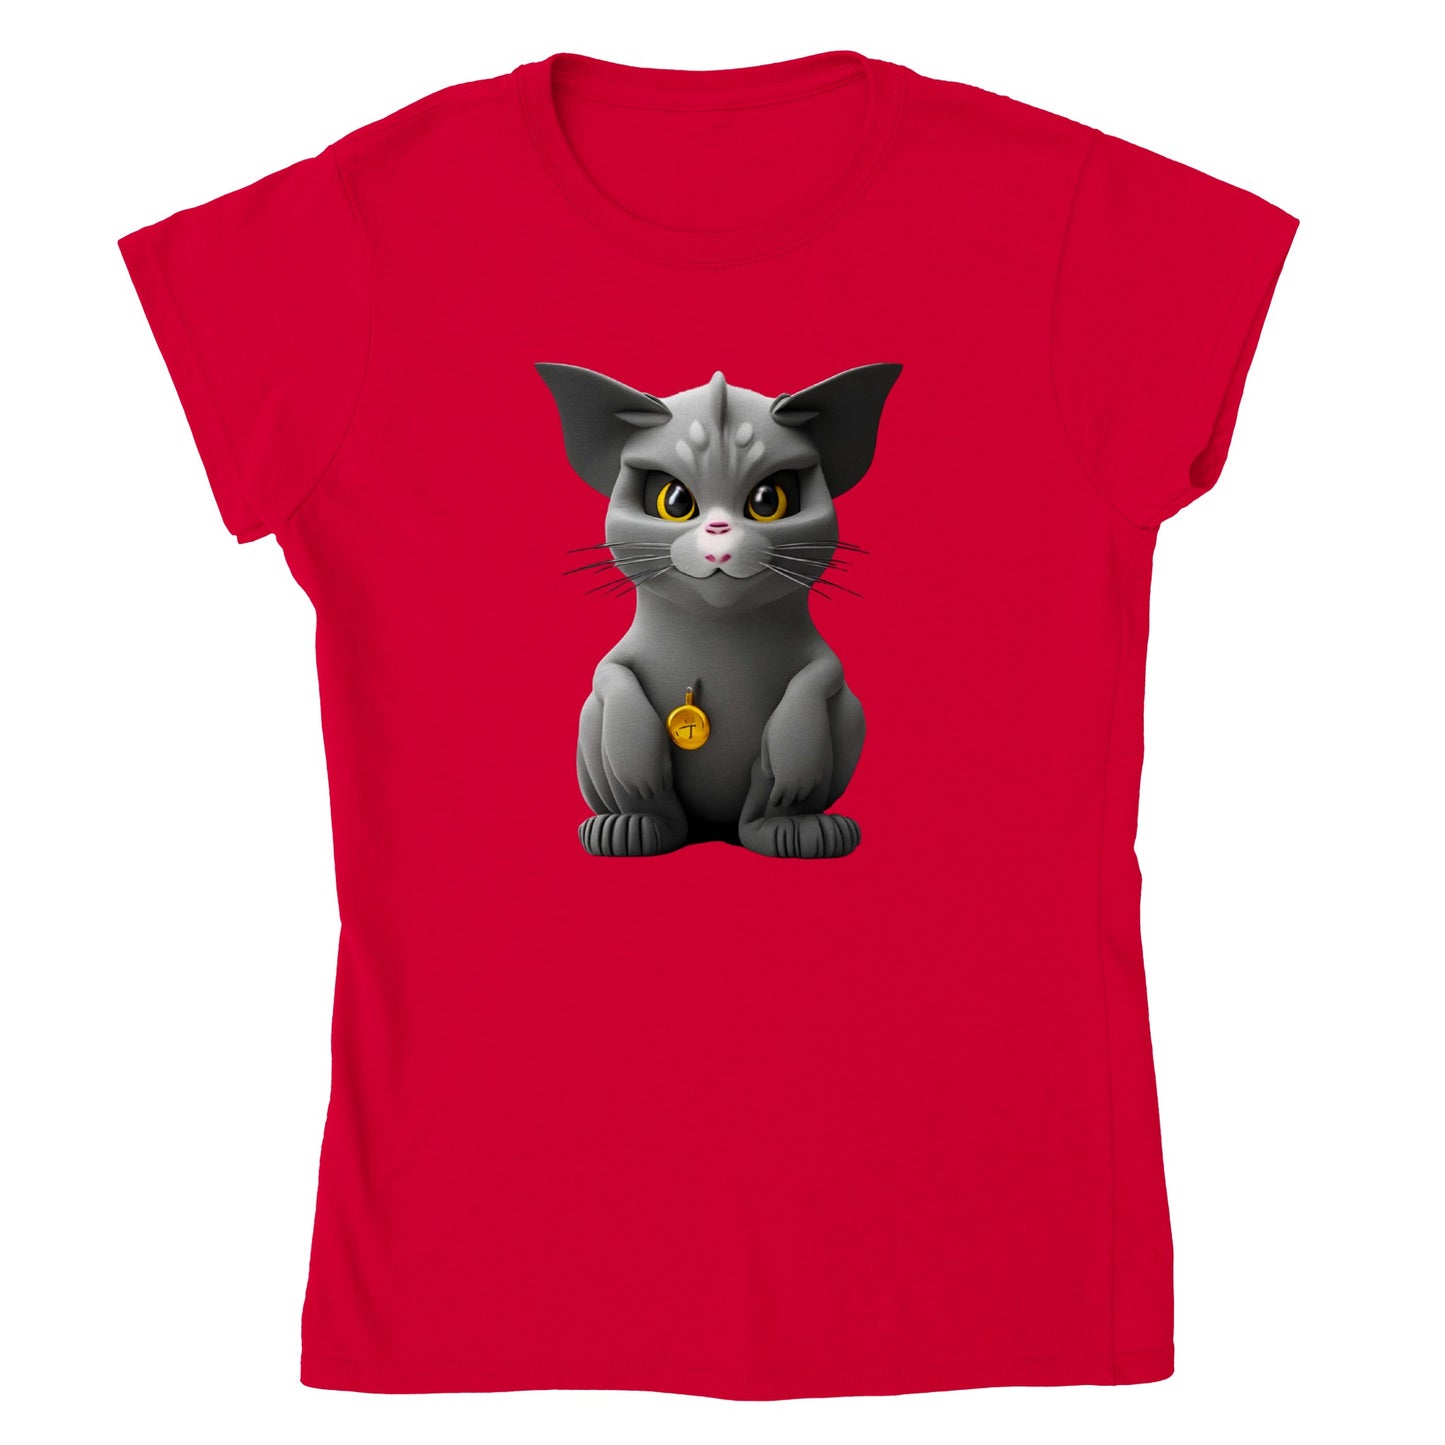 Adorable, Cool, Cute Cats and Kittens Toy - Classic Women’s Crewneck T-Shirt 62